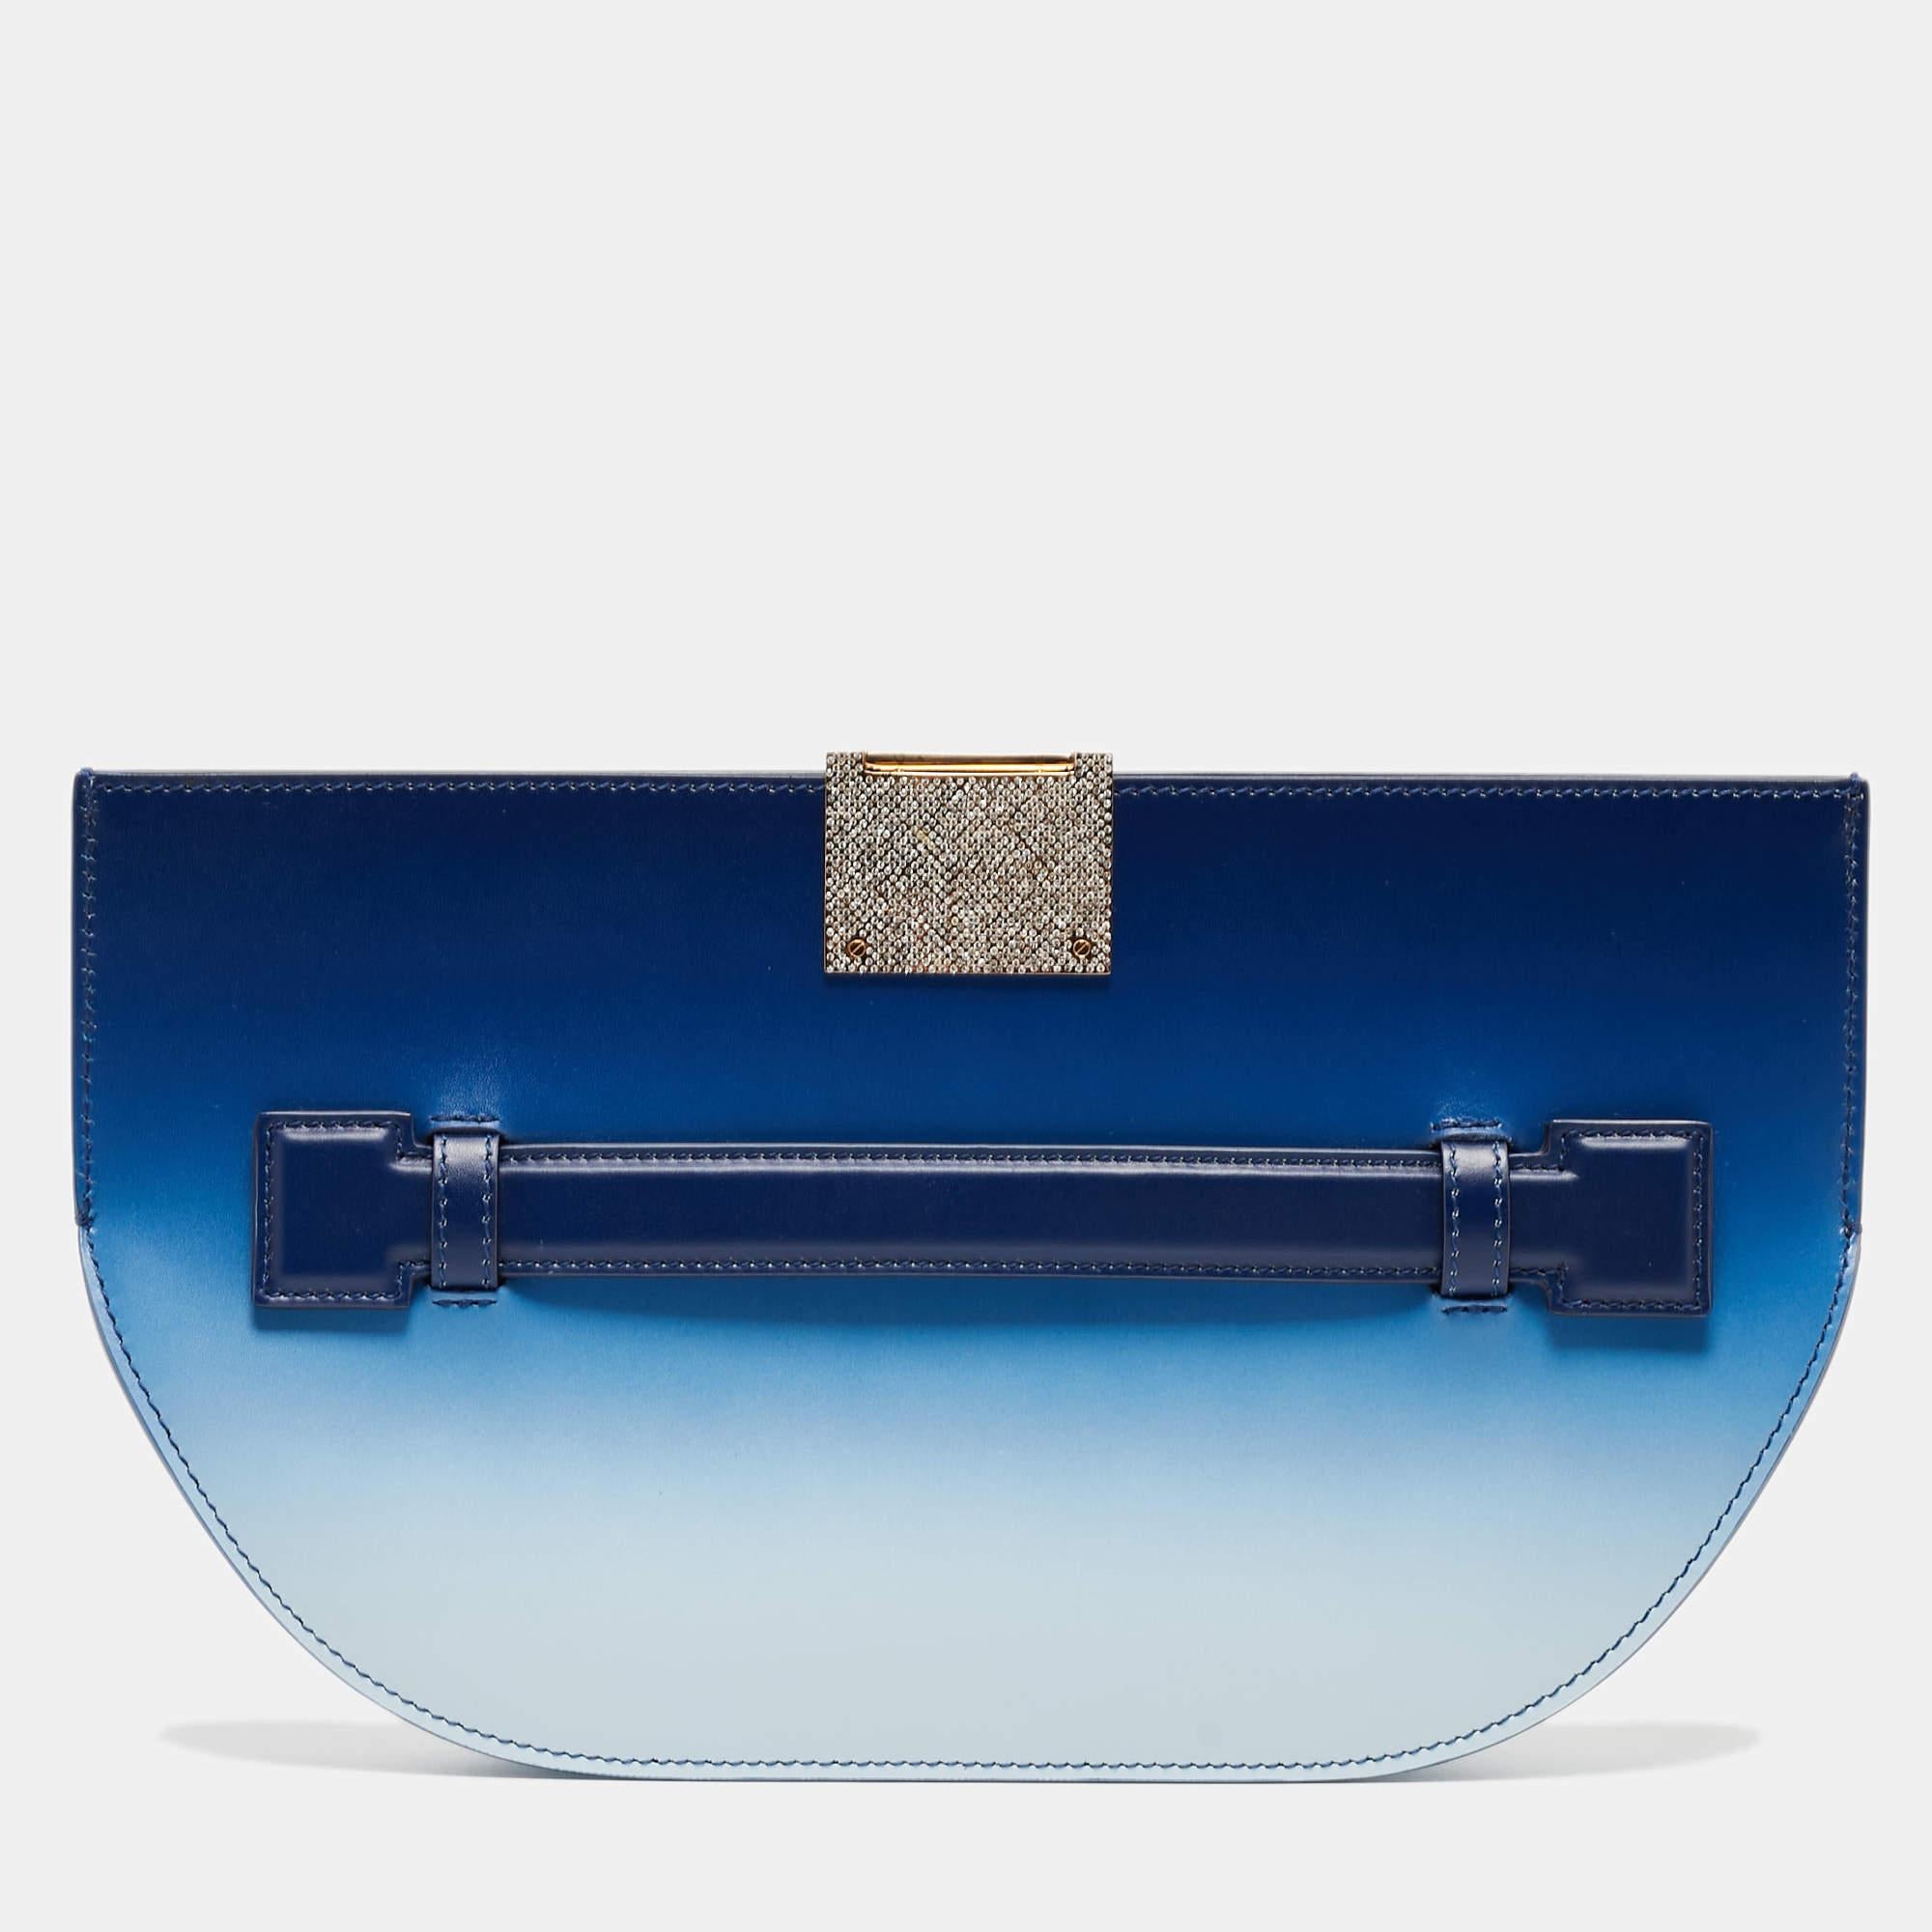 This clutch is just the right accessory to compliment your chic ensemble. It comes crafted in quality material featuring a well-sized interior that can comfortably hold all your little essentials.

Includes: Original Dustbag, Info Booklet